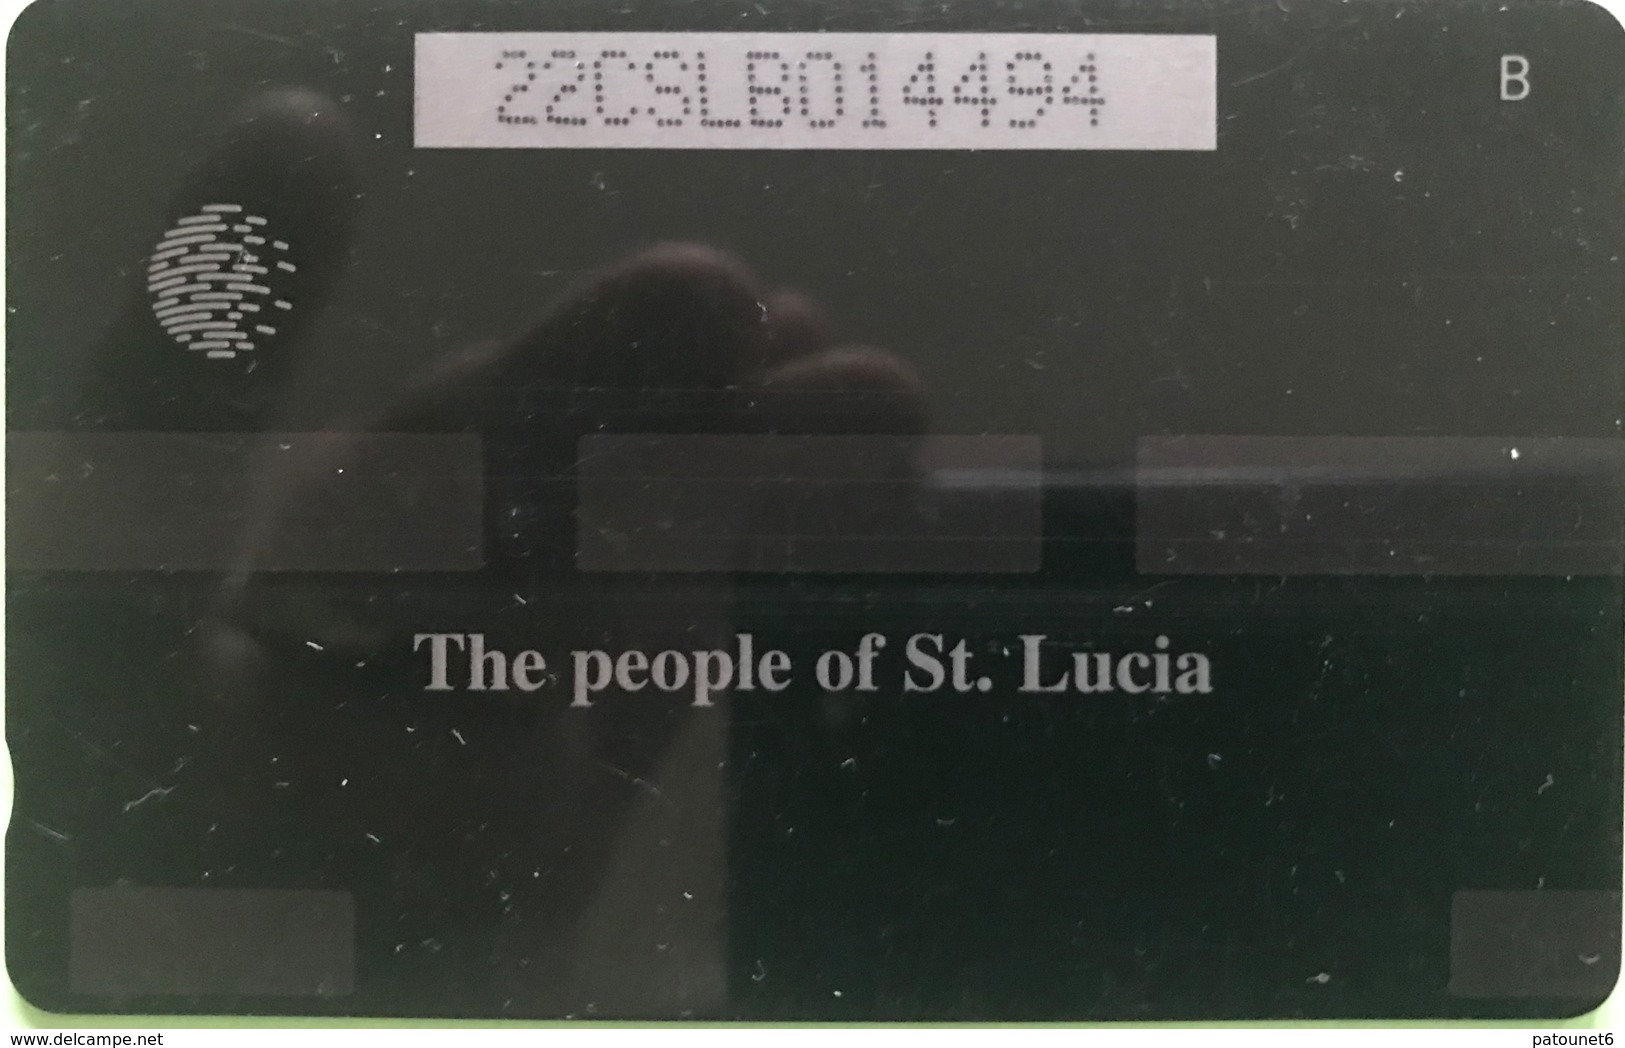 SAINTE LUCIE  -  Phonecard  - Cable & Wireless   - The People Of St. Lucia  -  EC $ 20 - Sainte Lucie